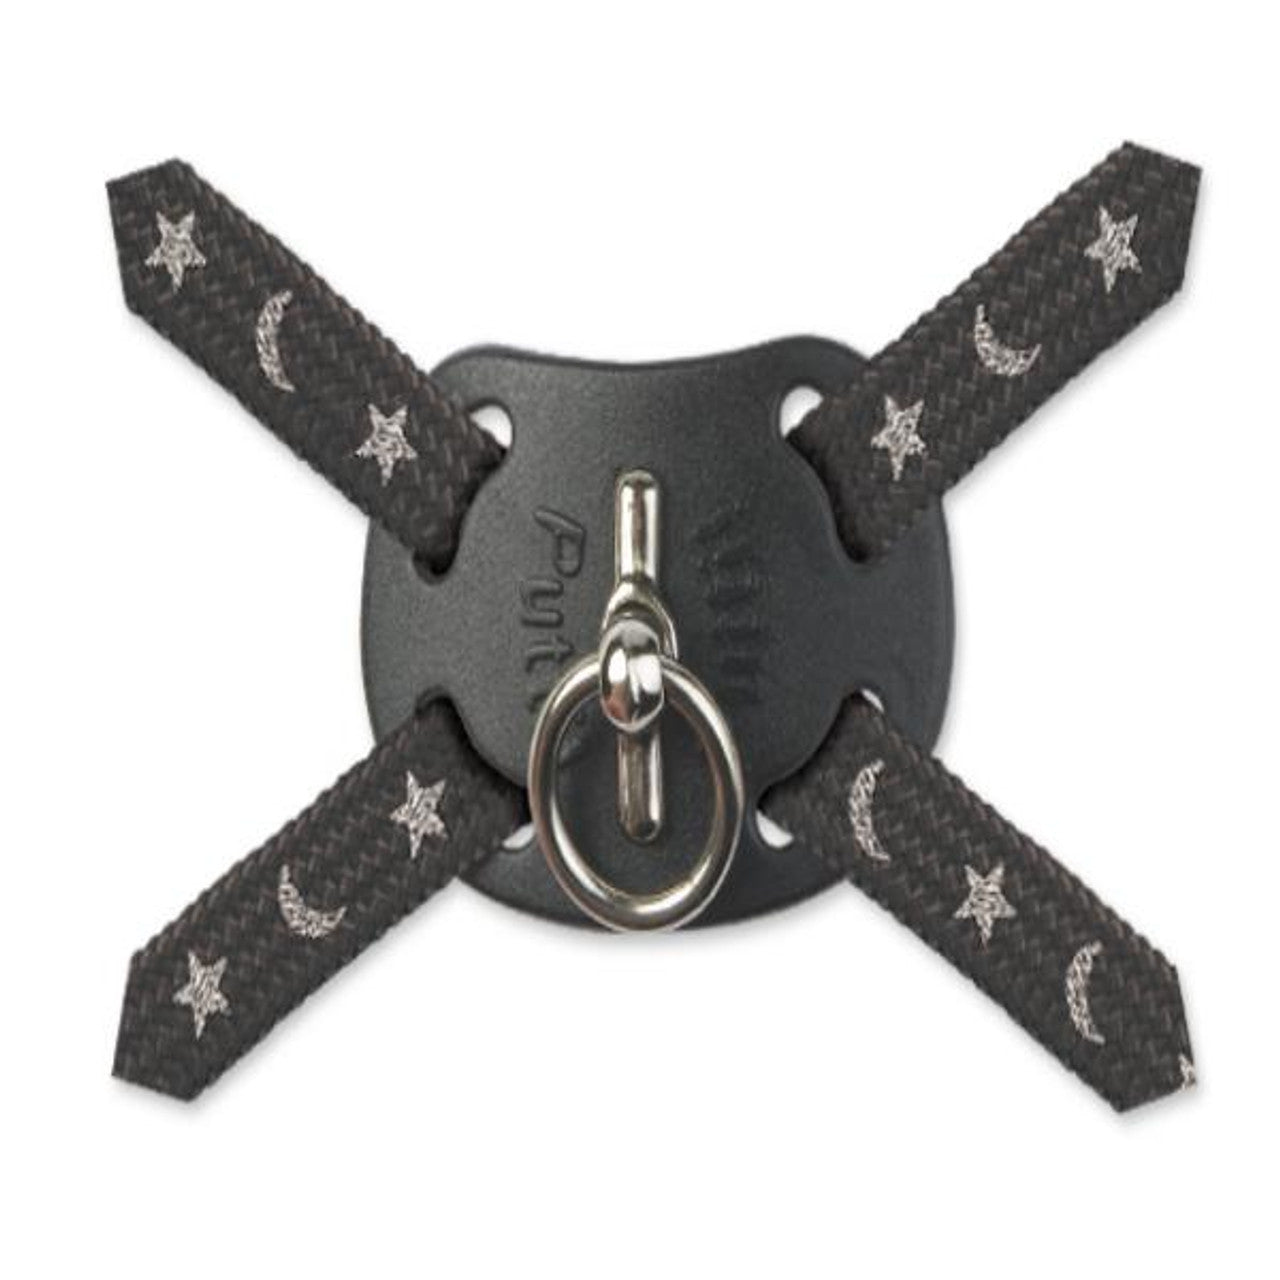 Cat Harness and Lead Set by Ancol, Moon & Star Design, The Cat Gallery